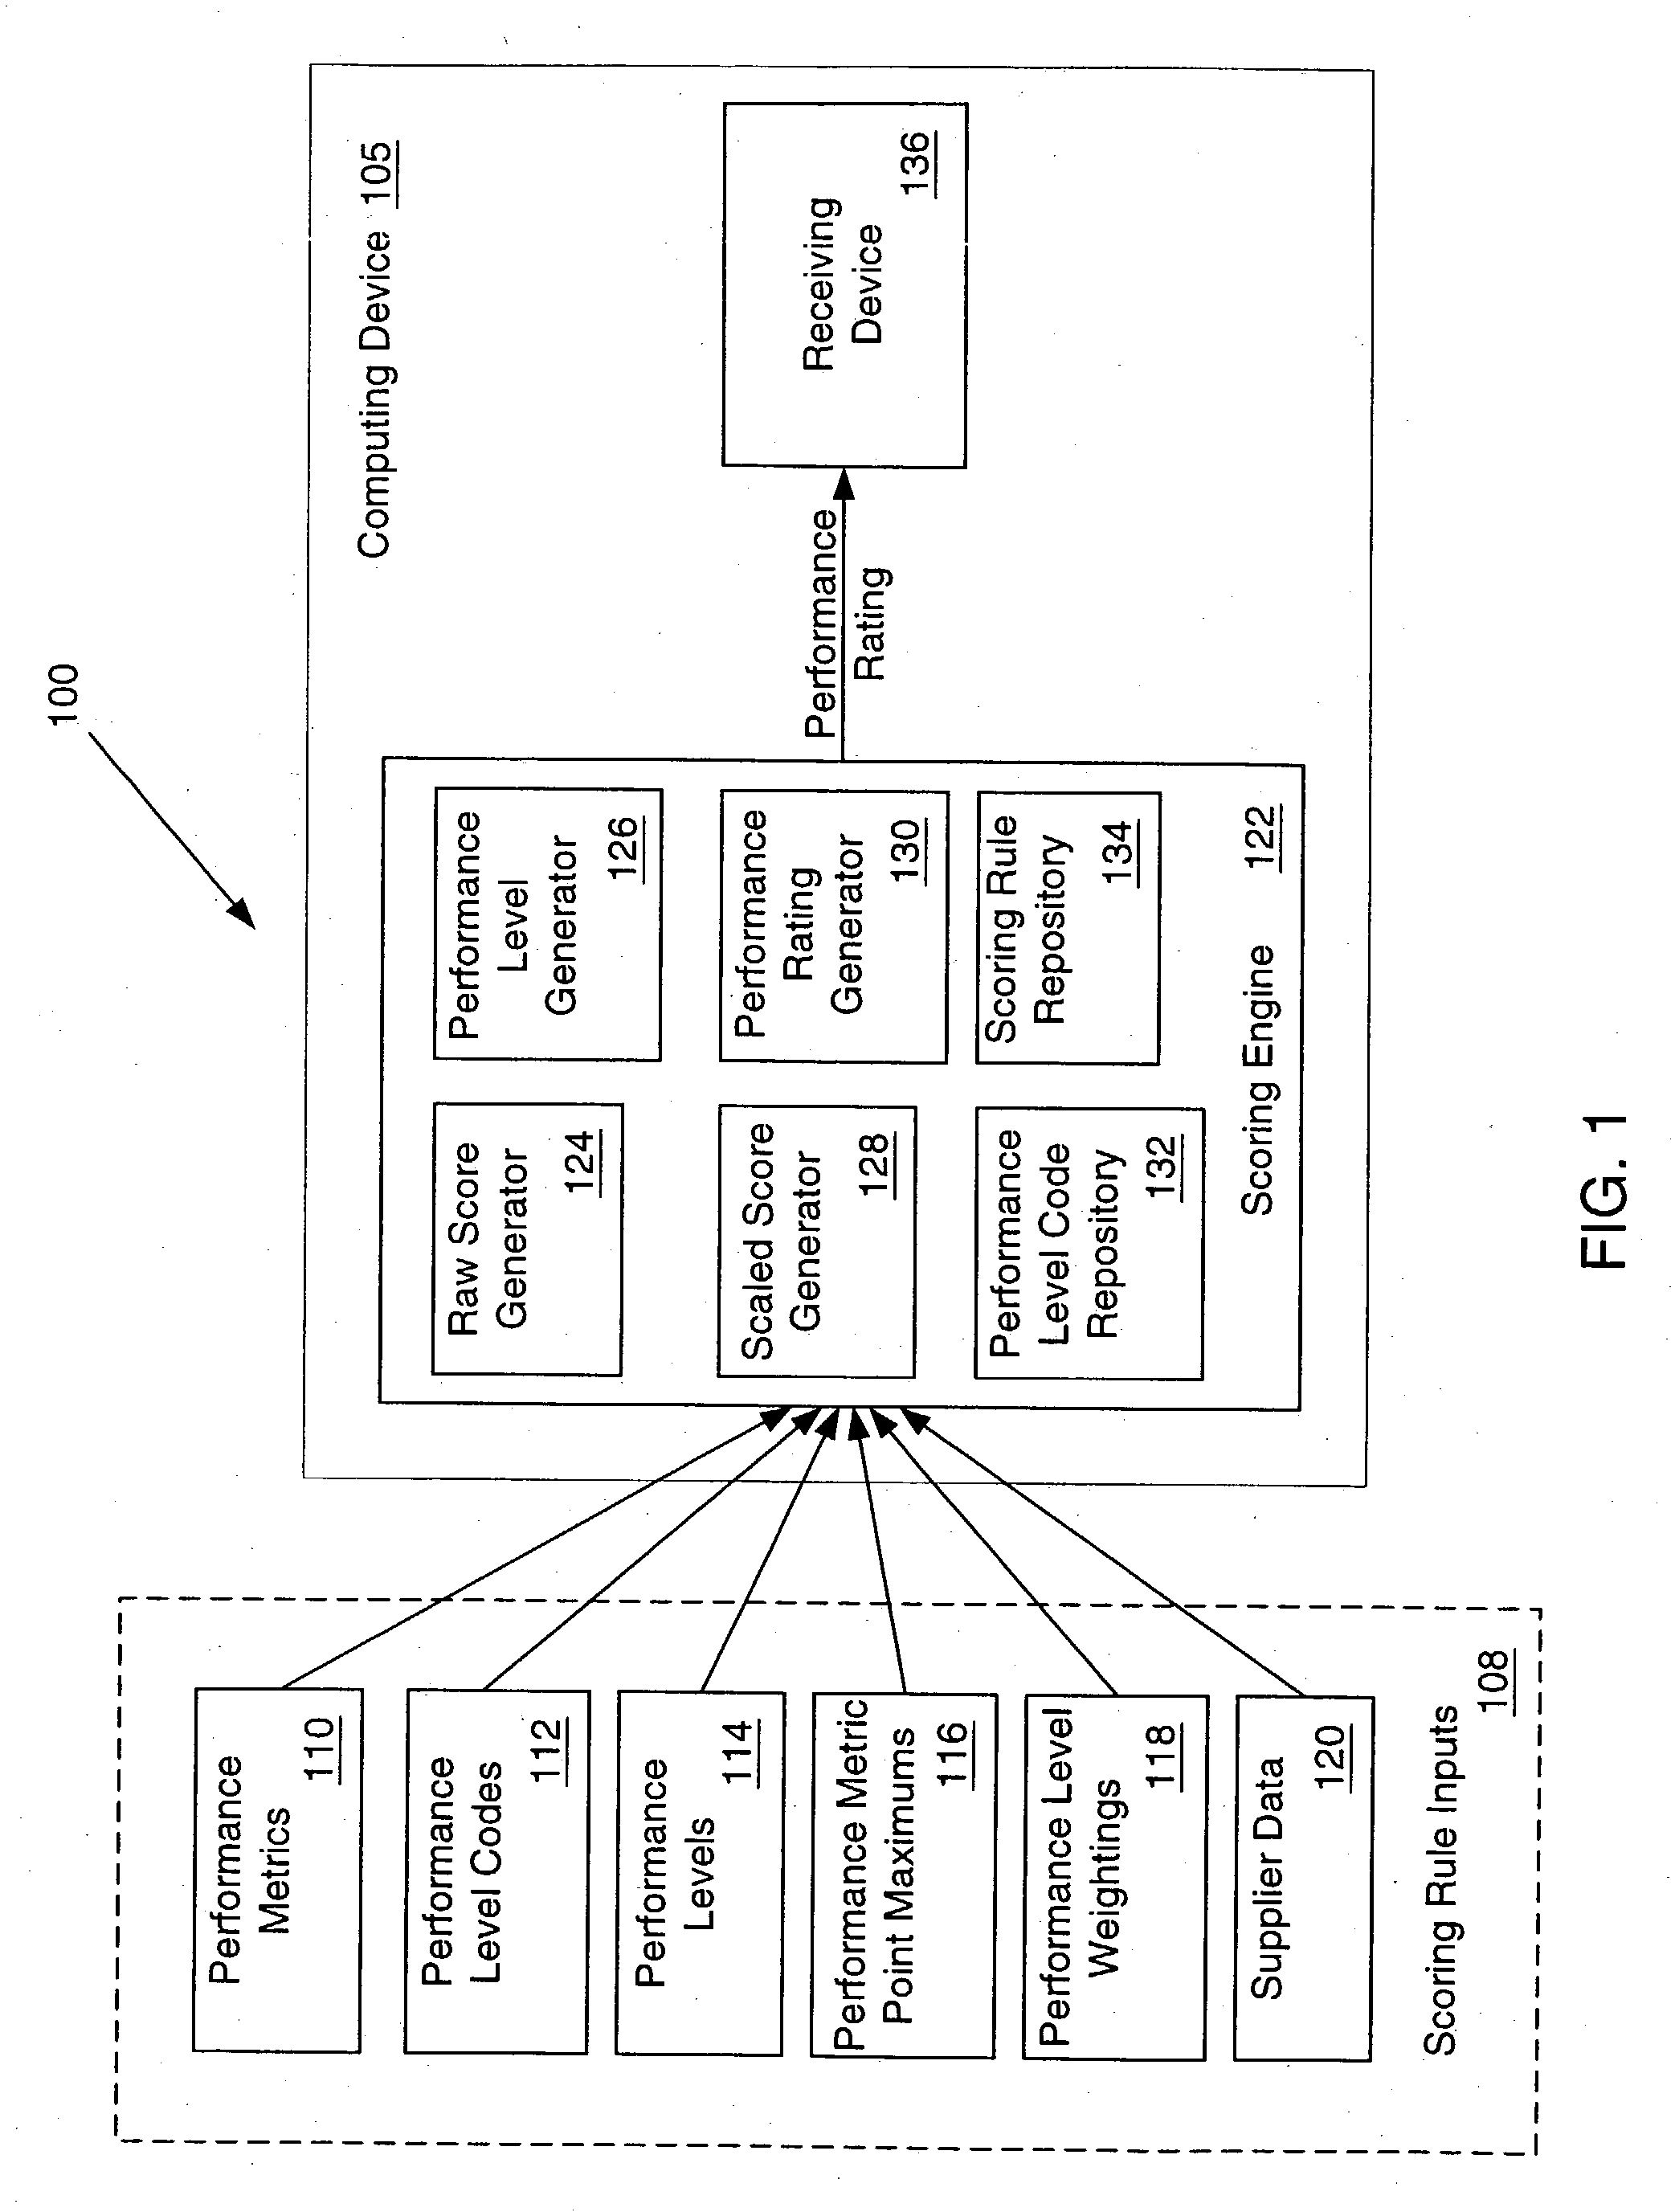 System and method for configuring scoring rules and generating supplier performance ratings